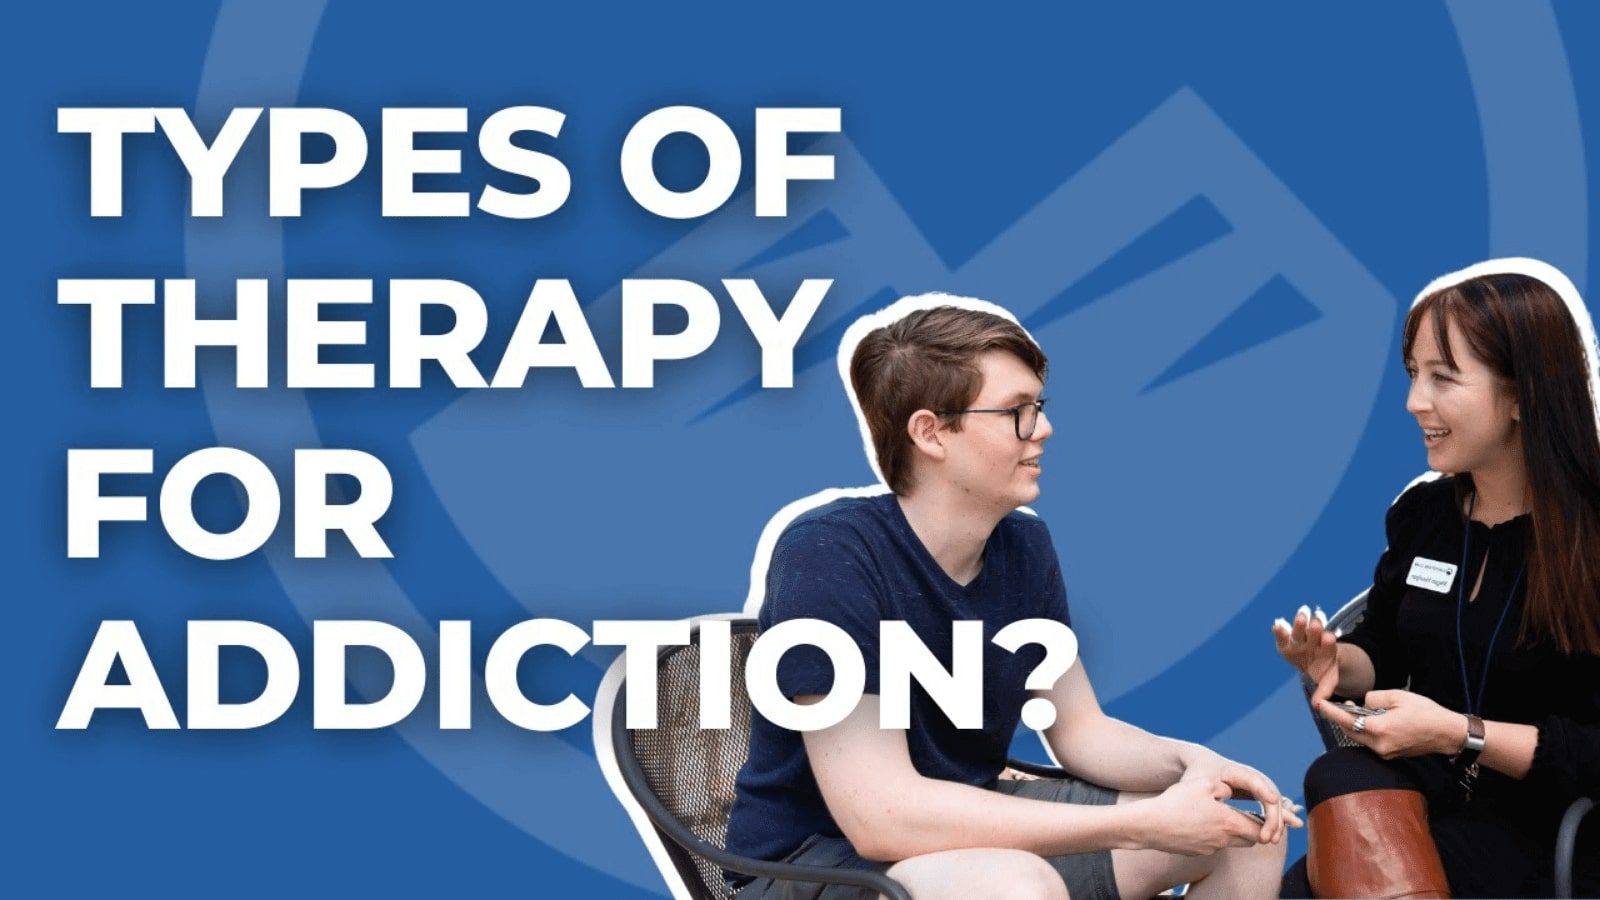 Types of therapy for addiction text next to a teen talking to therapist